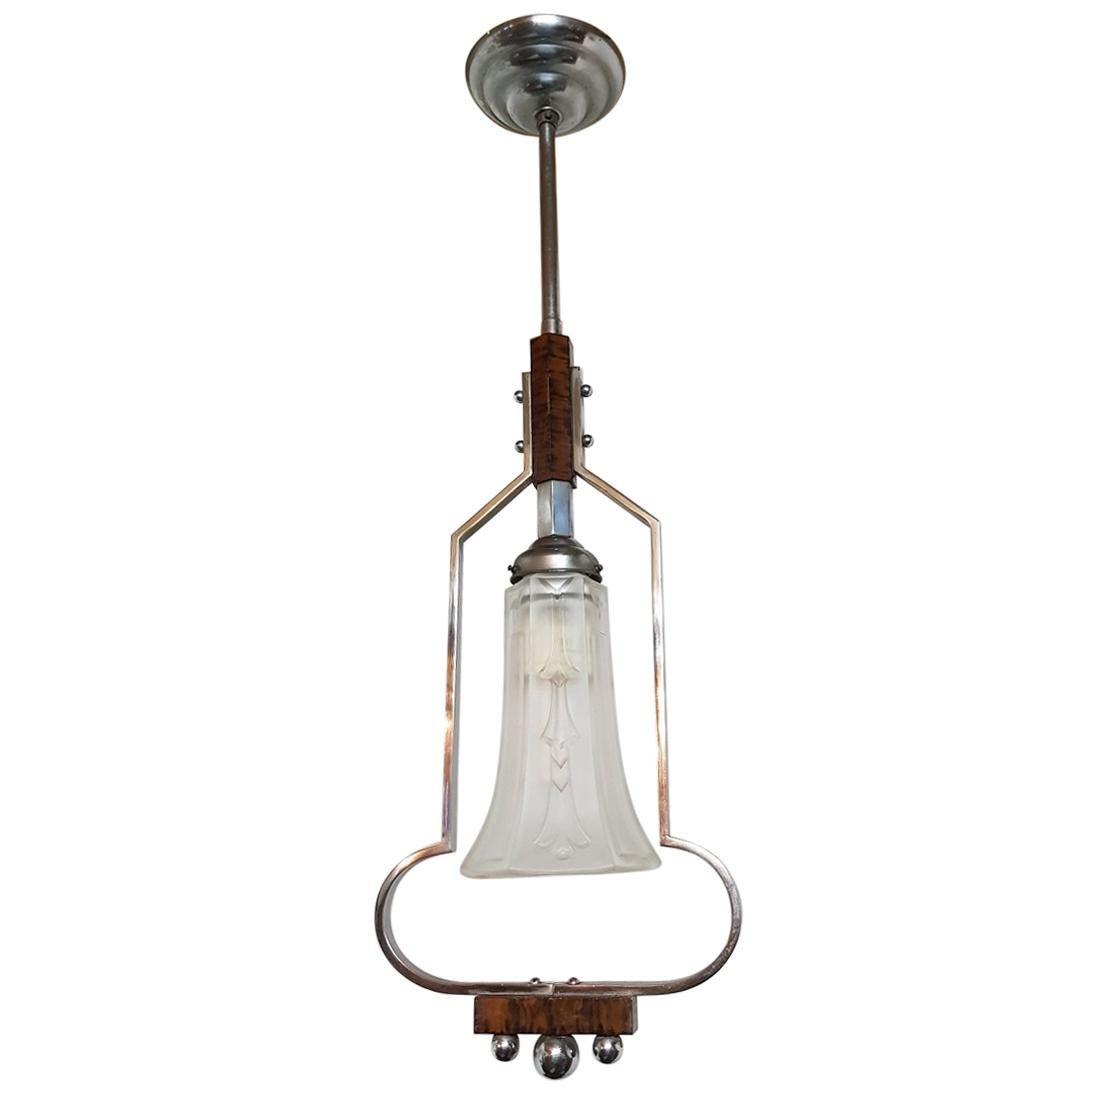 1930s Art Deco Chrome and Wooden Hall Pendant with Glass Shade For Sale